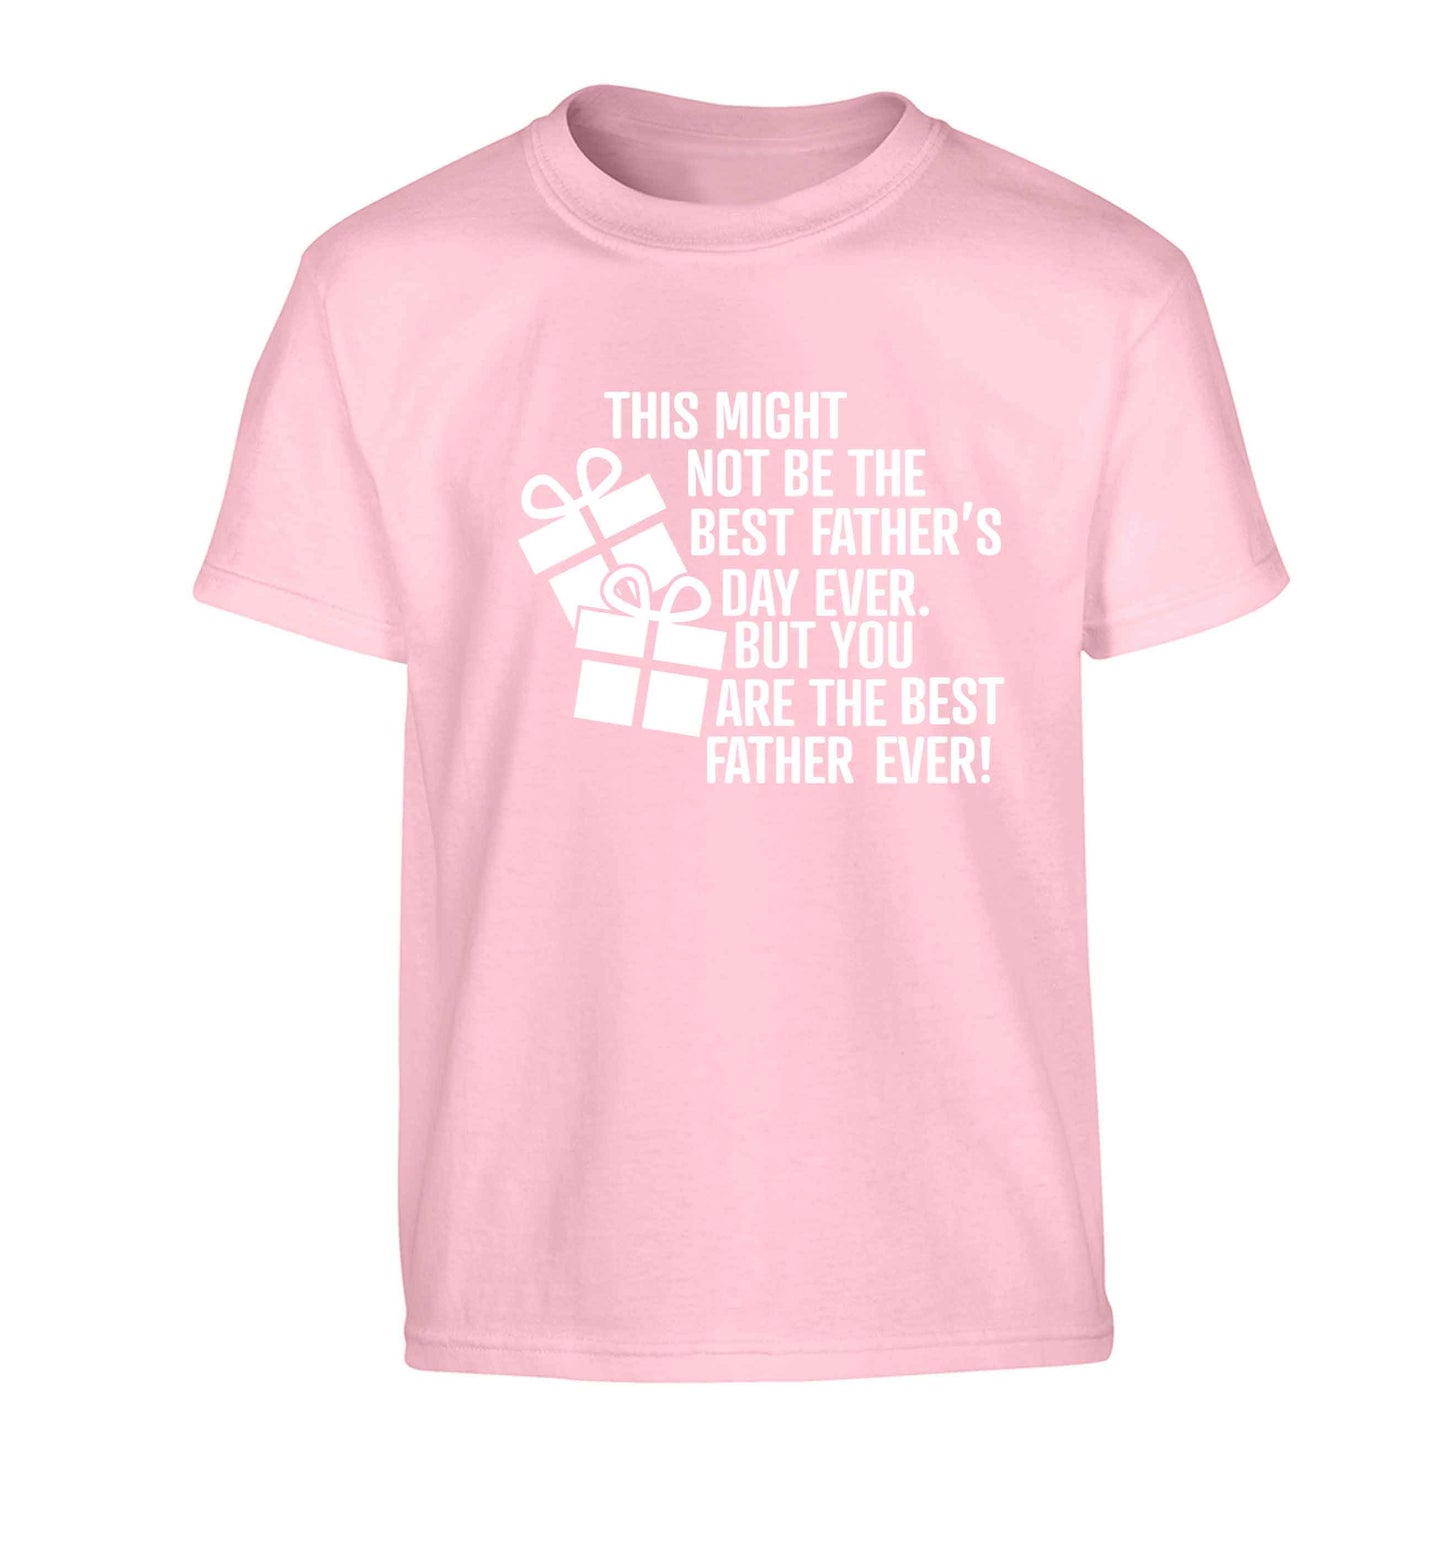 It might not be the best Father's Day ever but you are the best father ever! Children's light pink Tshirt 12-13 Years